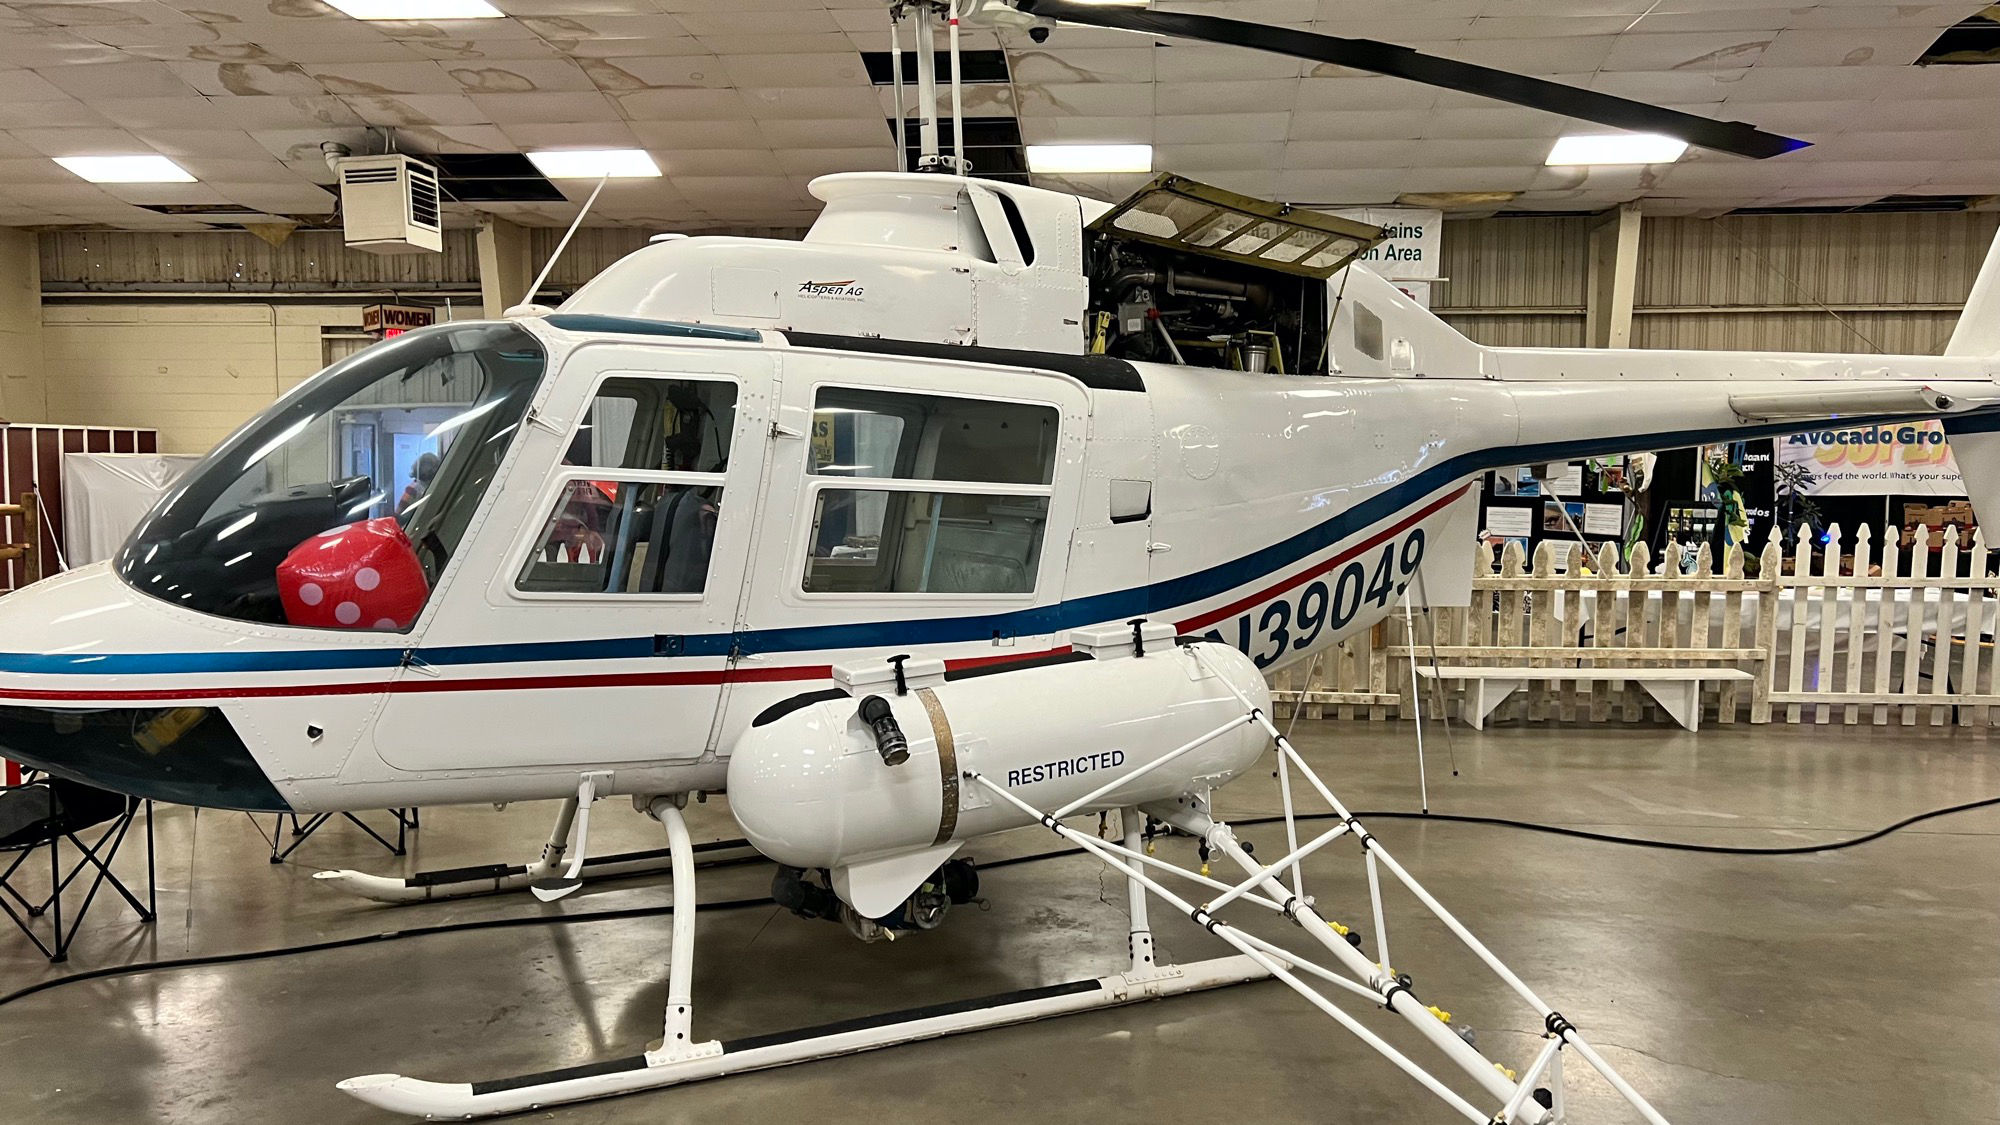 Aspen AG Helicopters and Aviation